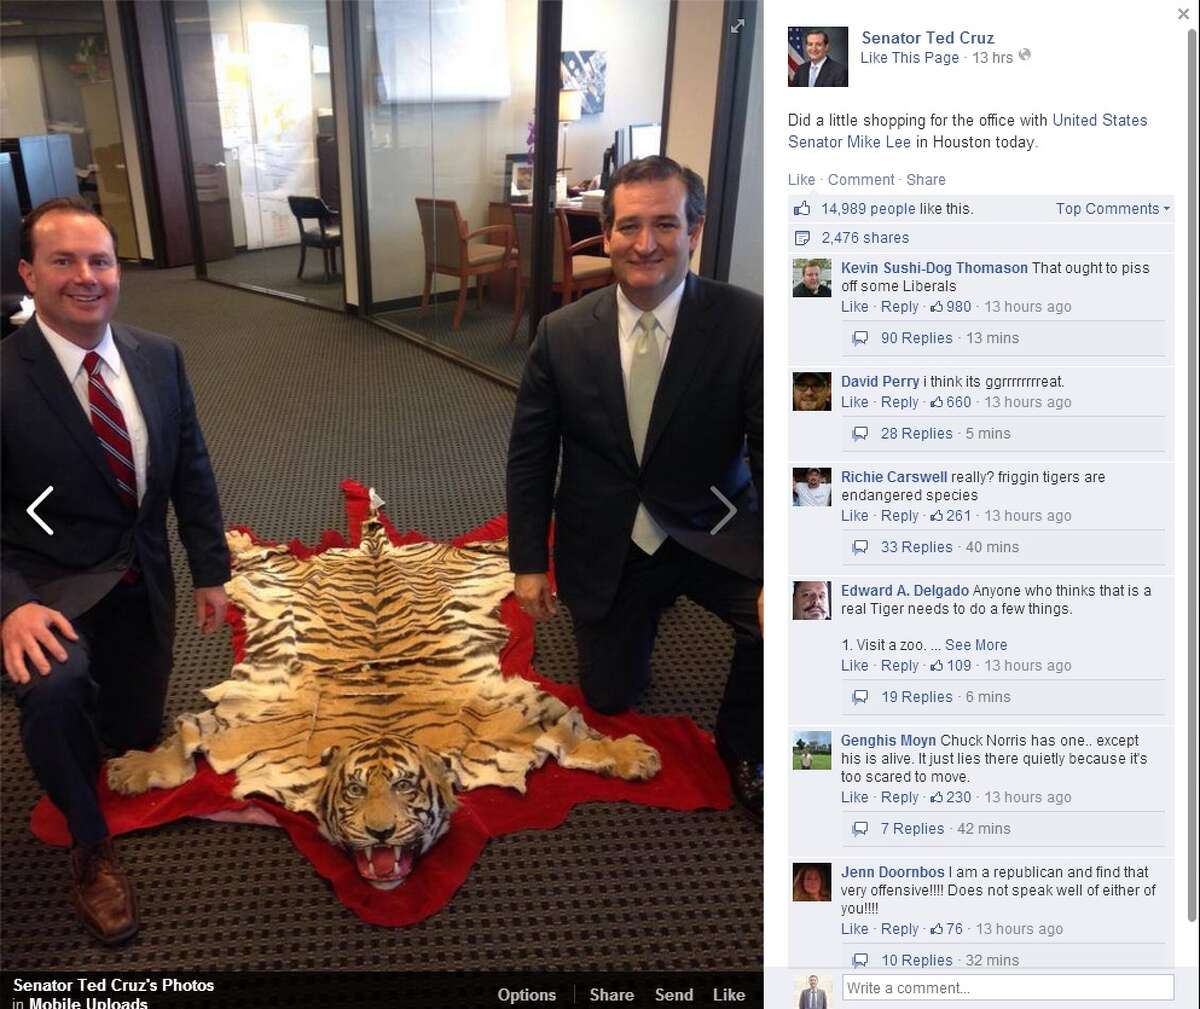 U.S. Sen. Ted Cruz caused a stir with a photo posted of him next to a rug that appears to be made of a tiger's pelt.